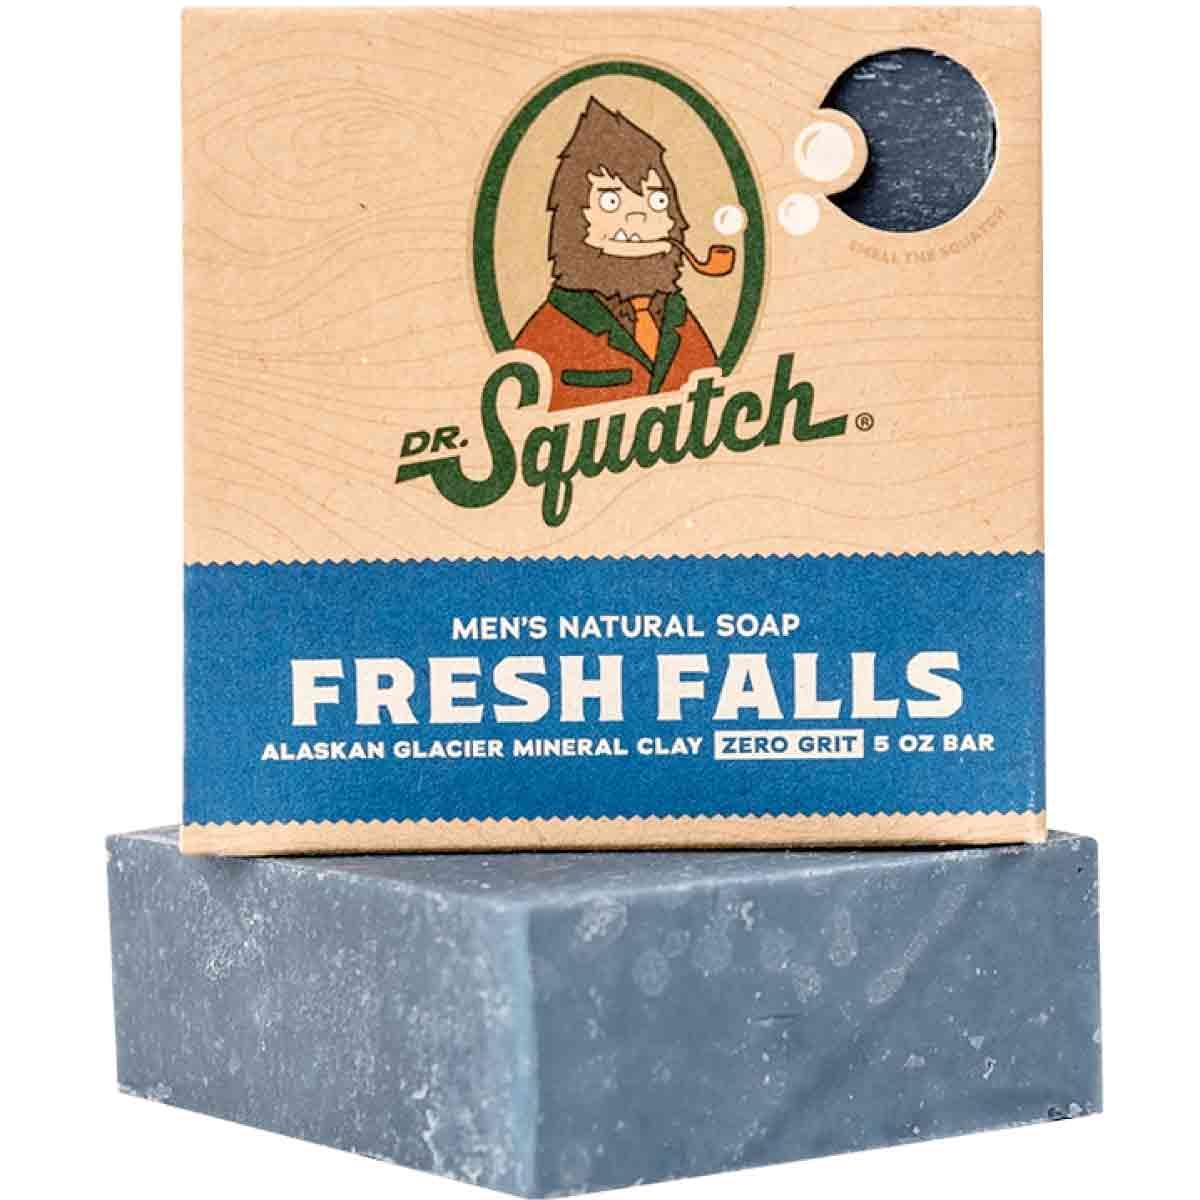 Dr. Squatch - Official Review of Spidey Suds 